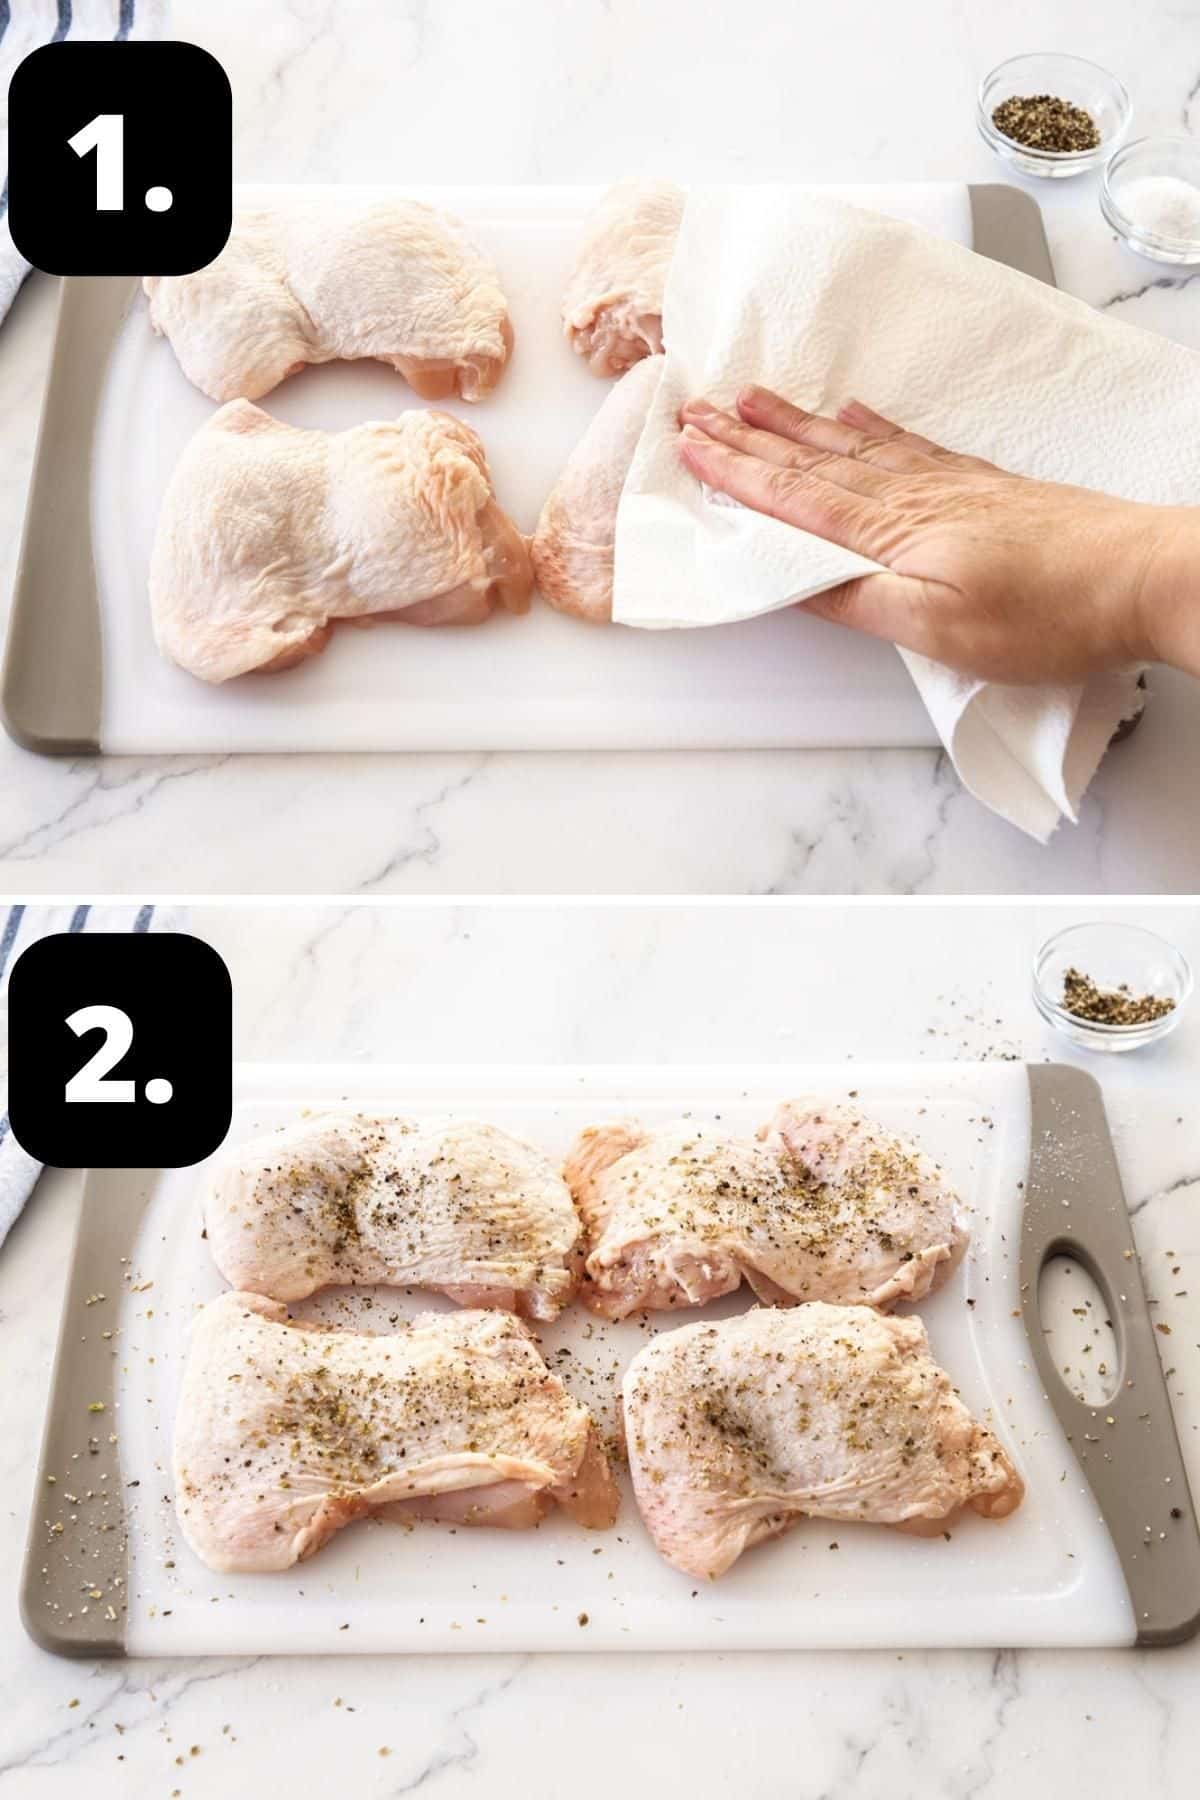 Steps 1-2 of preparing this recipe - patting the chicken thighs with paper towel and seasoning them.